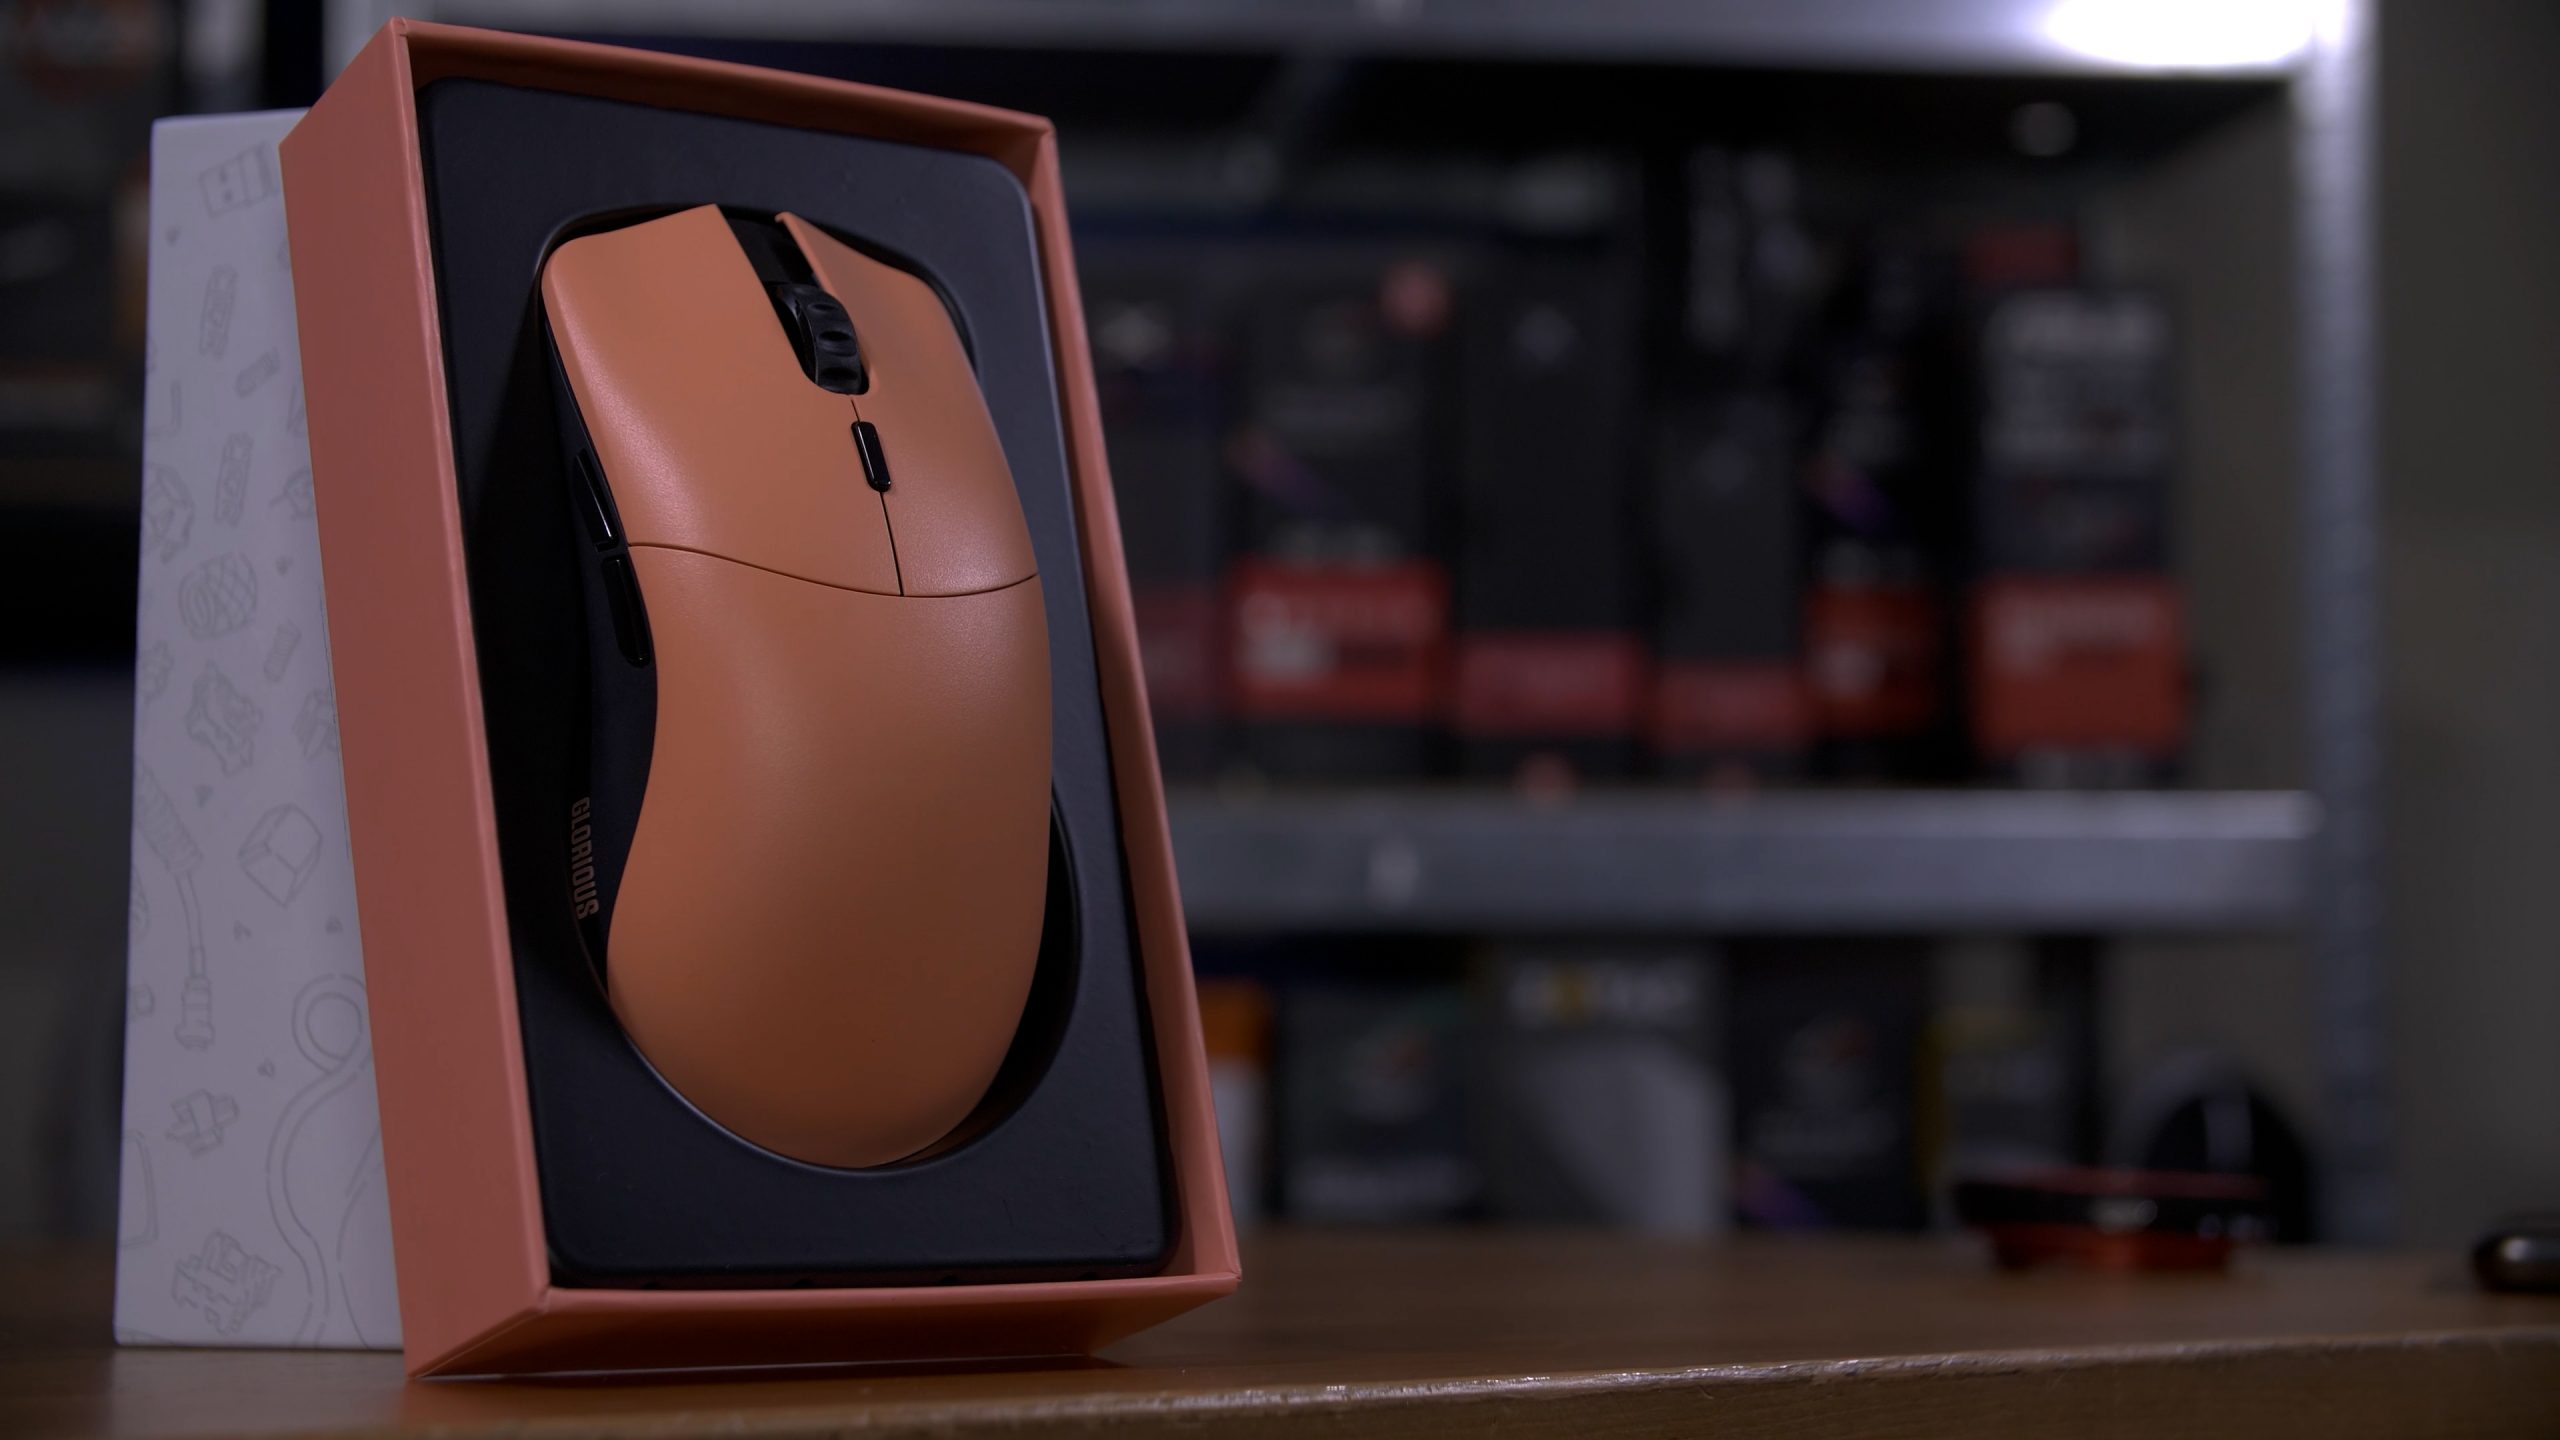 Model O- Wireless review: Glorious' smallest and lightest mouse yet